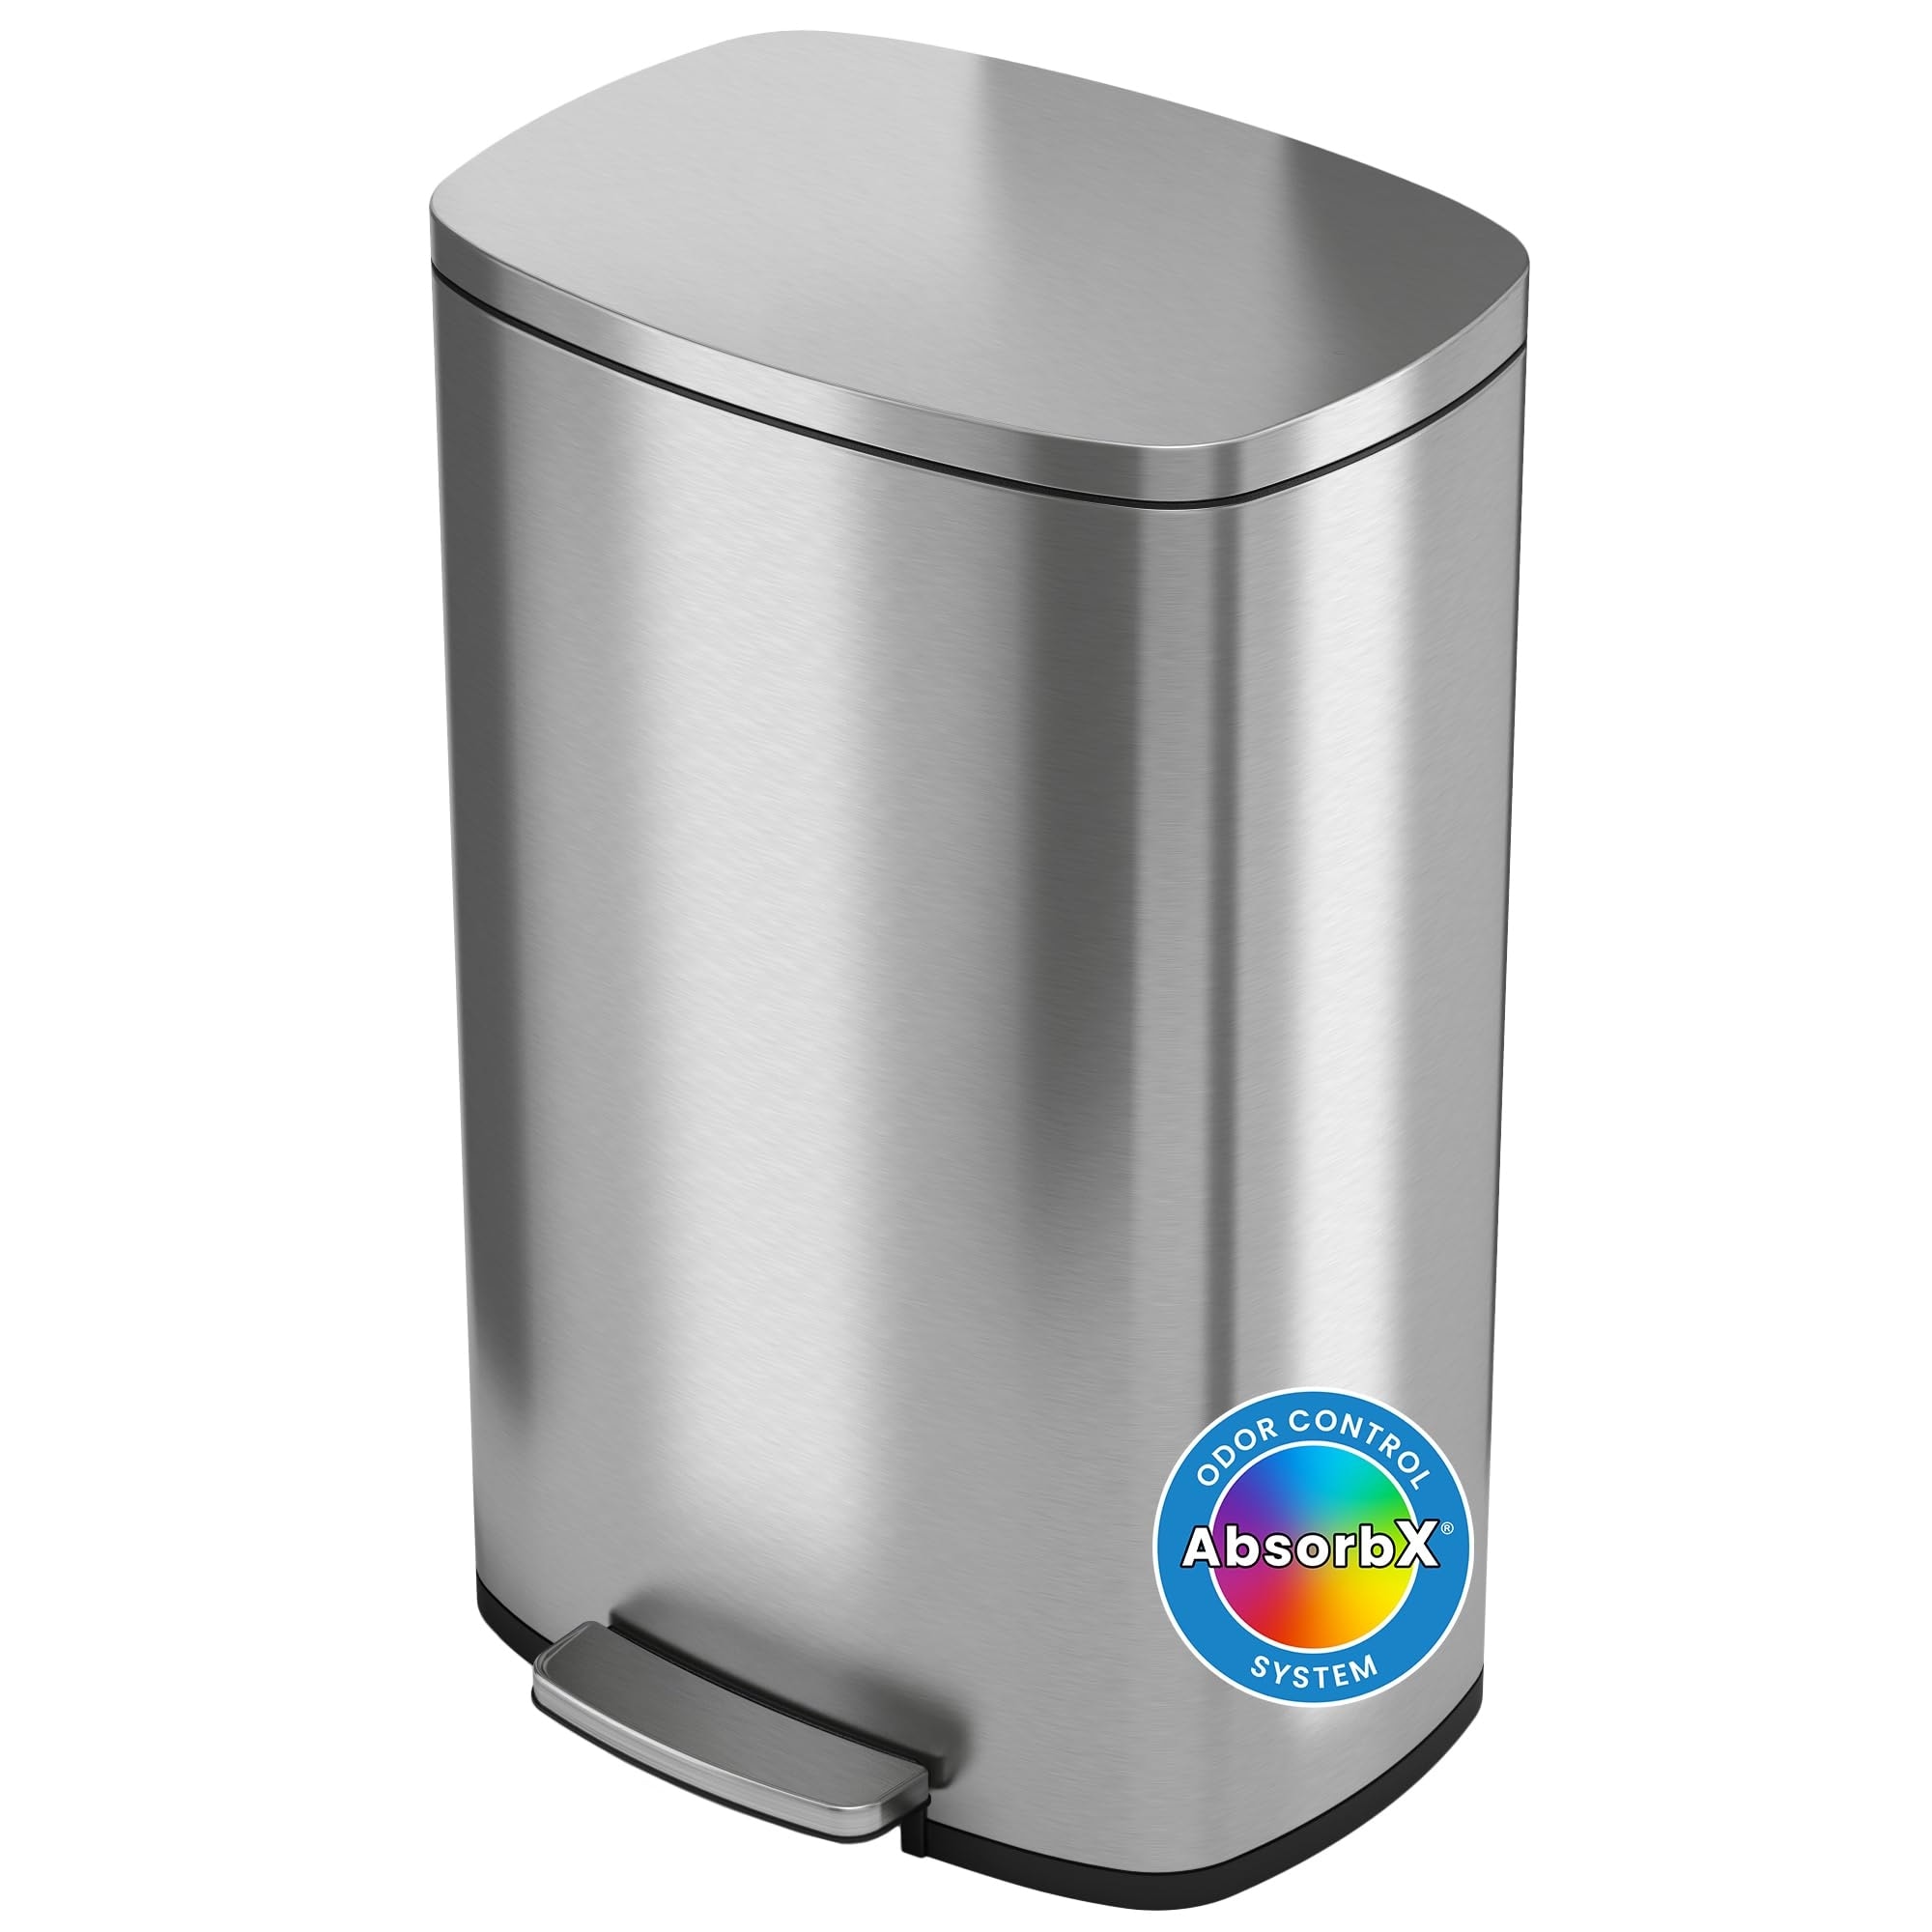 13.2 Gallon Step Trash Can with Odor Filter System, Stainless Steel 50  Liter Pedal Garbage Bin, Silent and Gentle Lid Close - Bed Bath & Beyond -  39188662